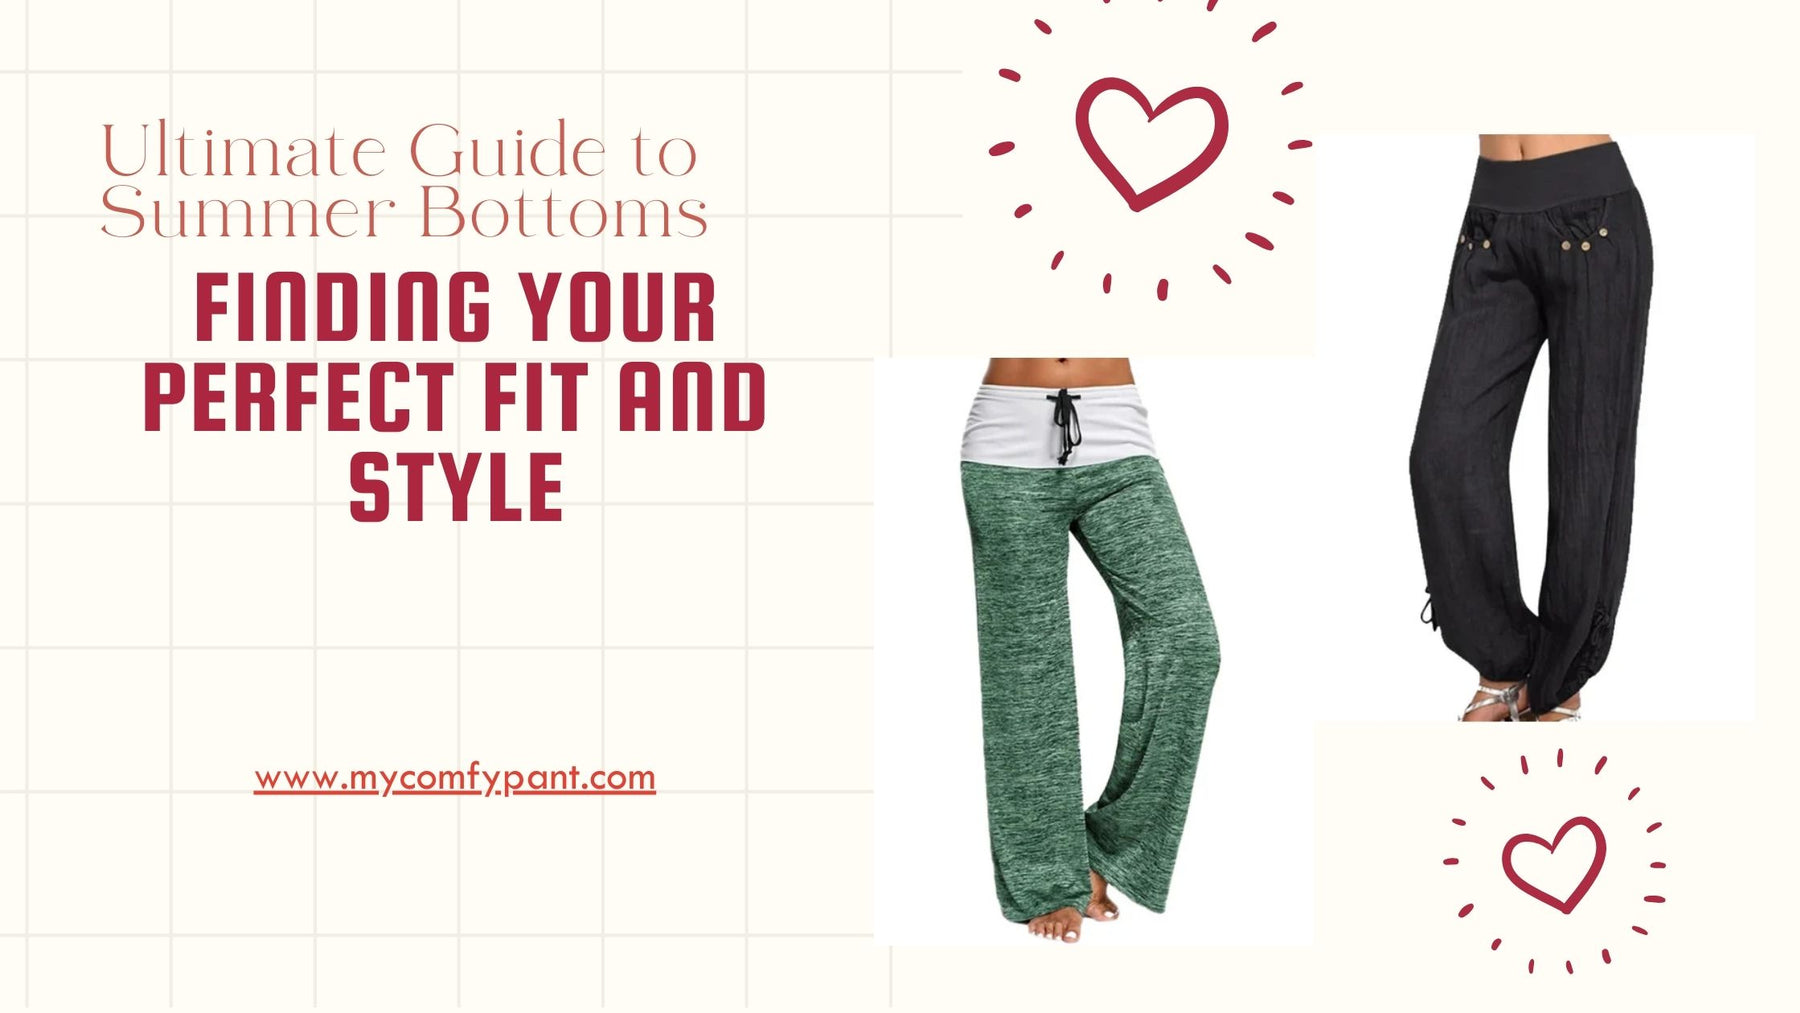 Ultimate Guide to Summer Bottoms: Finding Your Perfect Fit and Style